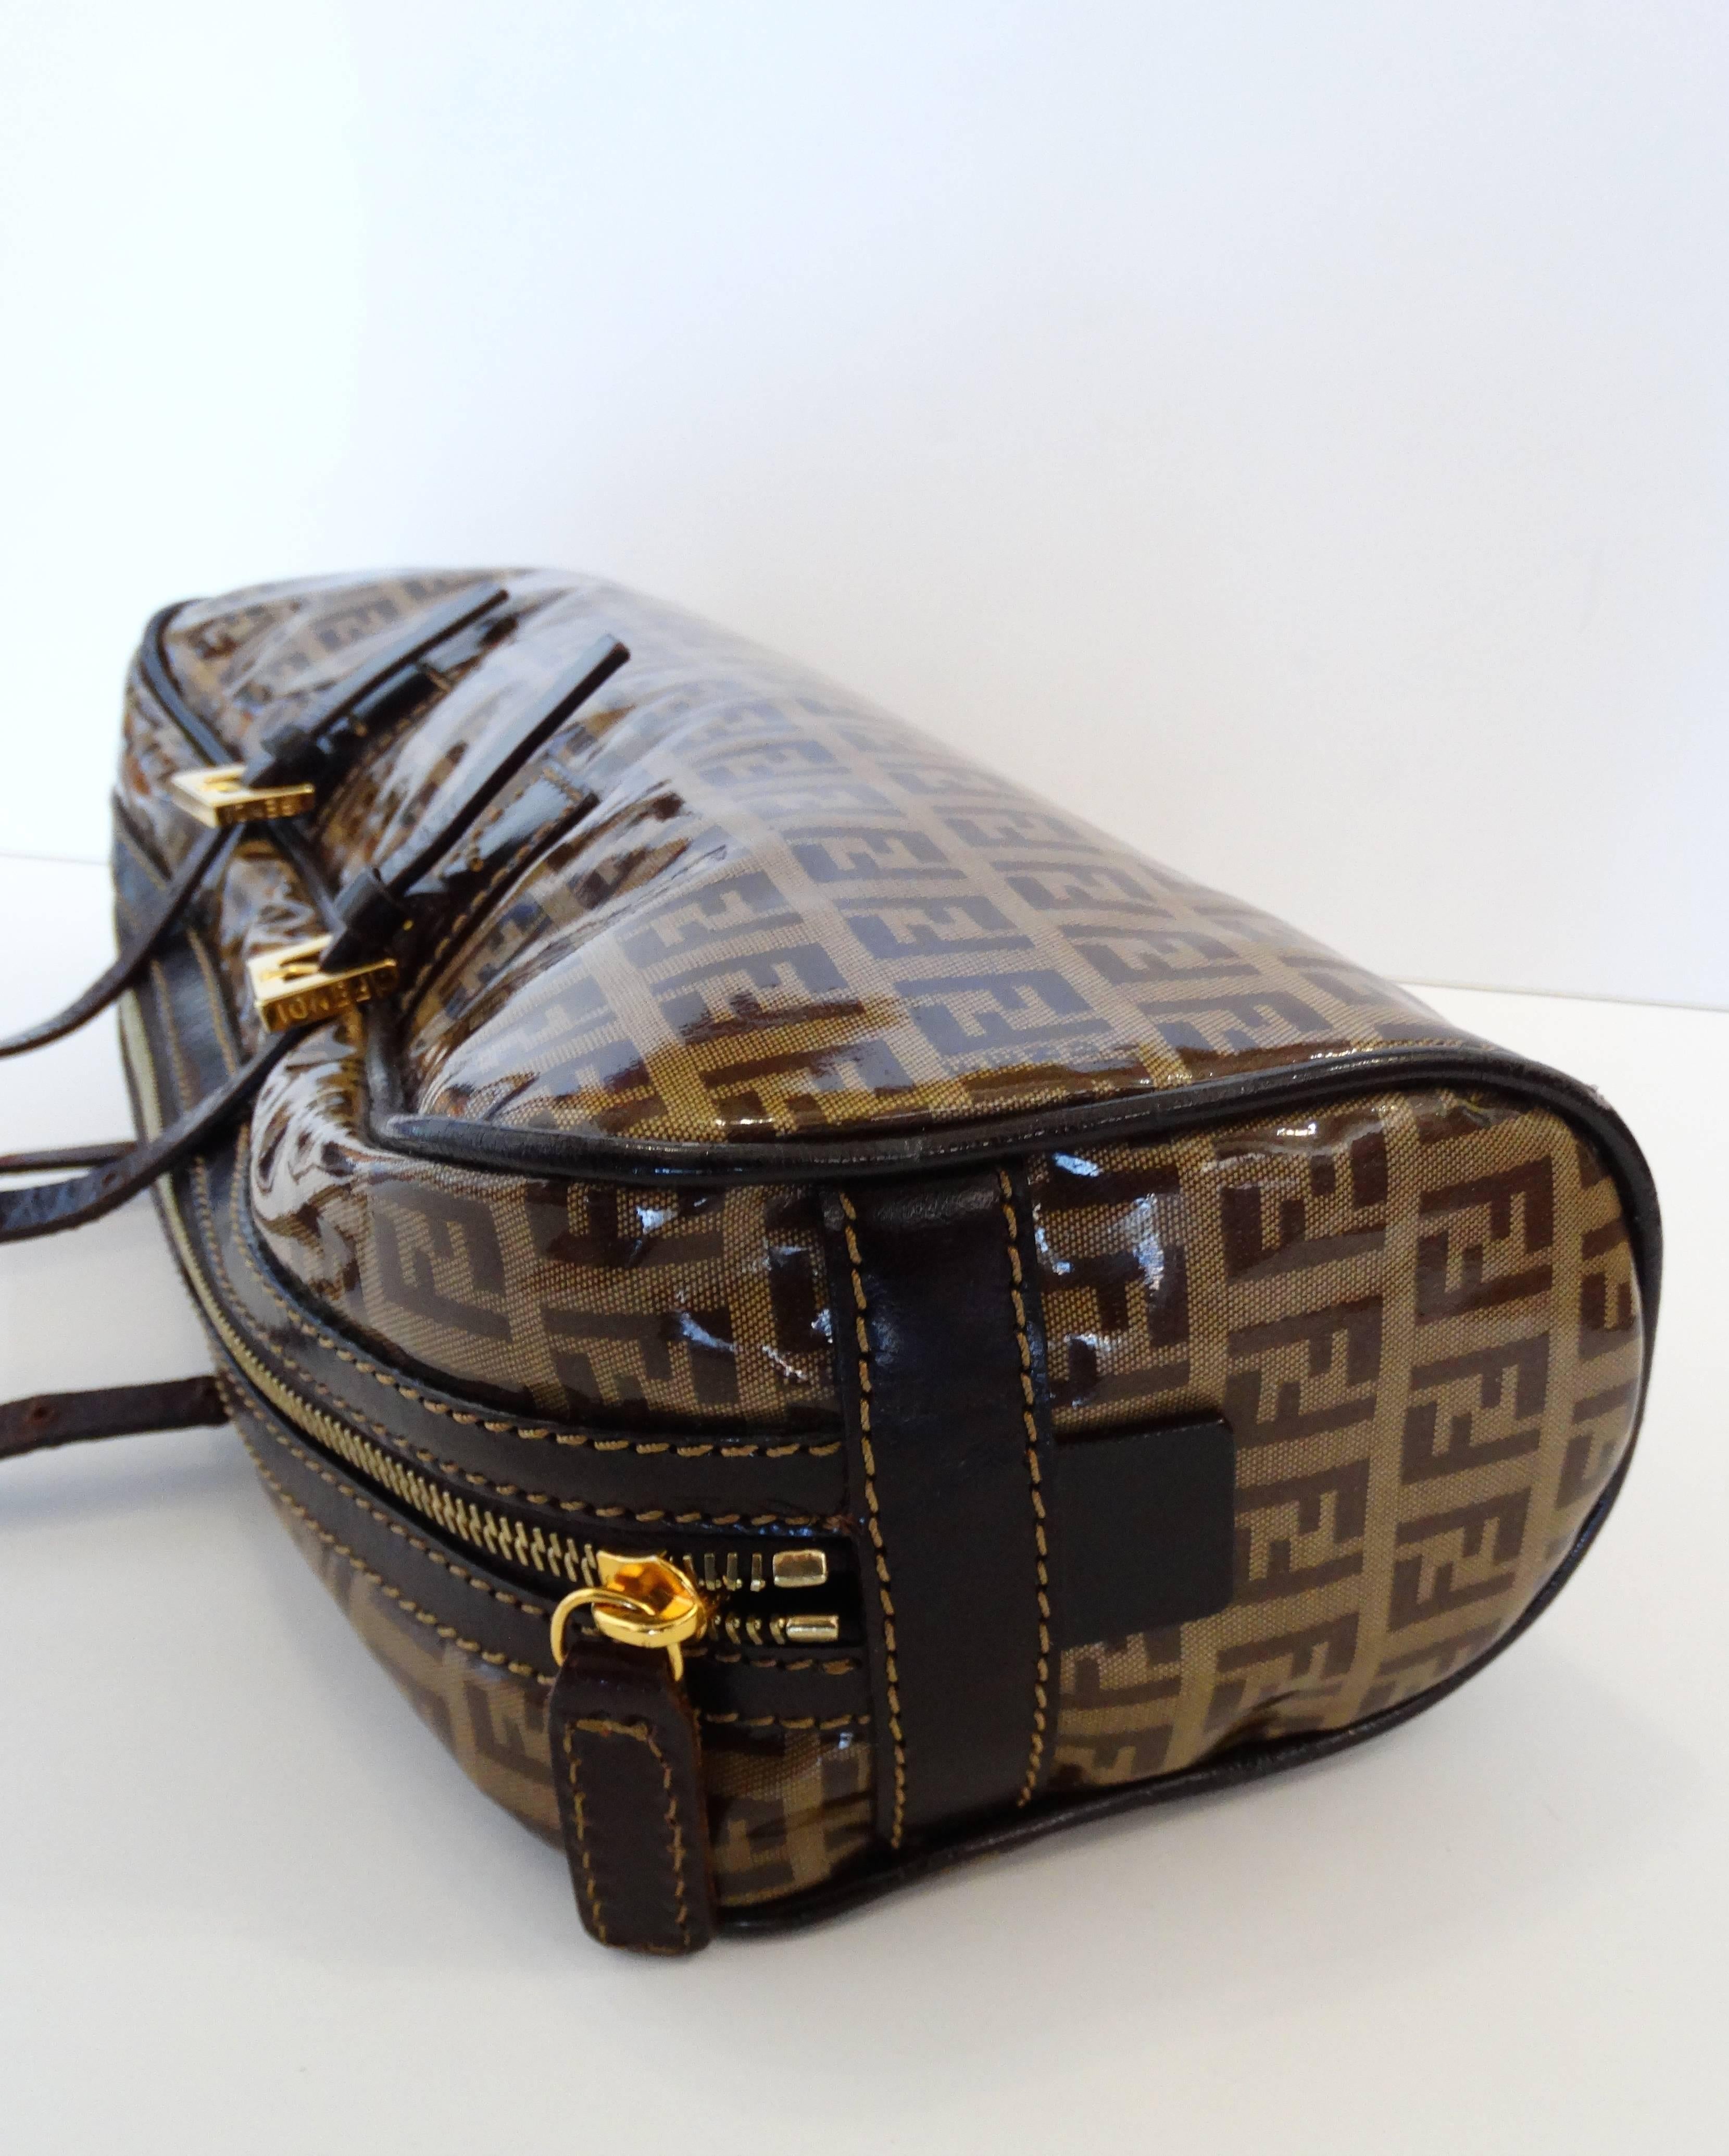 The most adorable little top handle Fendi bag in the brown Zucchino print! Monogram logo printed jacquard fabric with an overlay of vinyl. Dark brown leather straps with gold metal buckles and zipper. Fully lined fabric interior with zipper pocket.